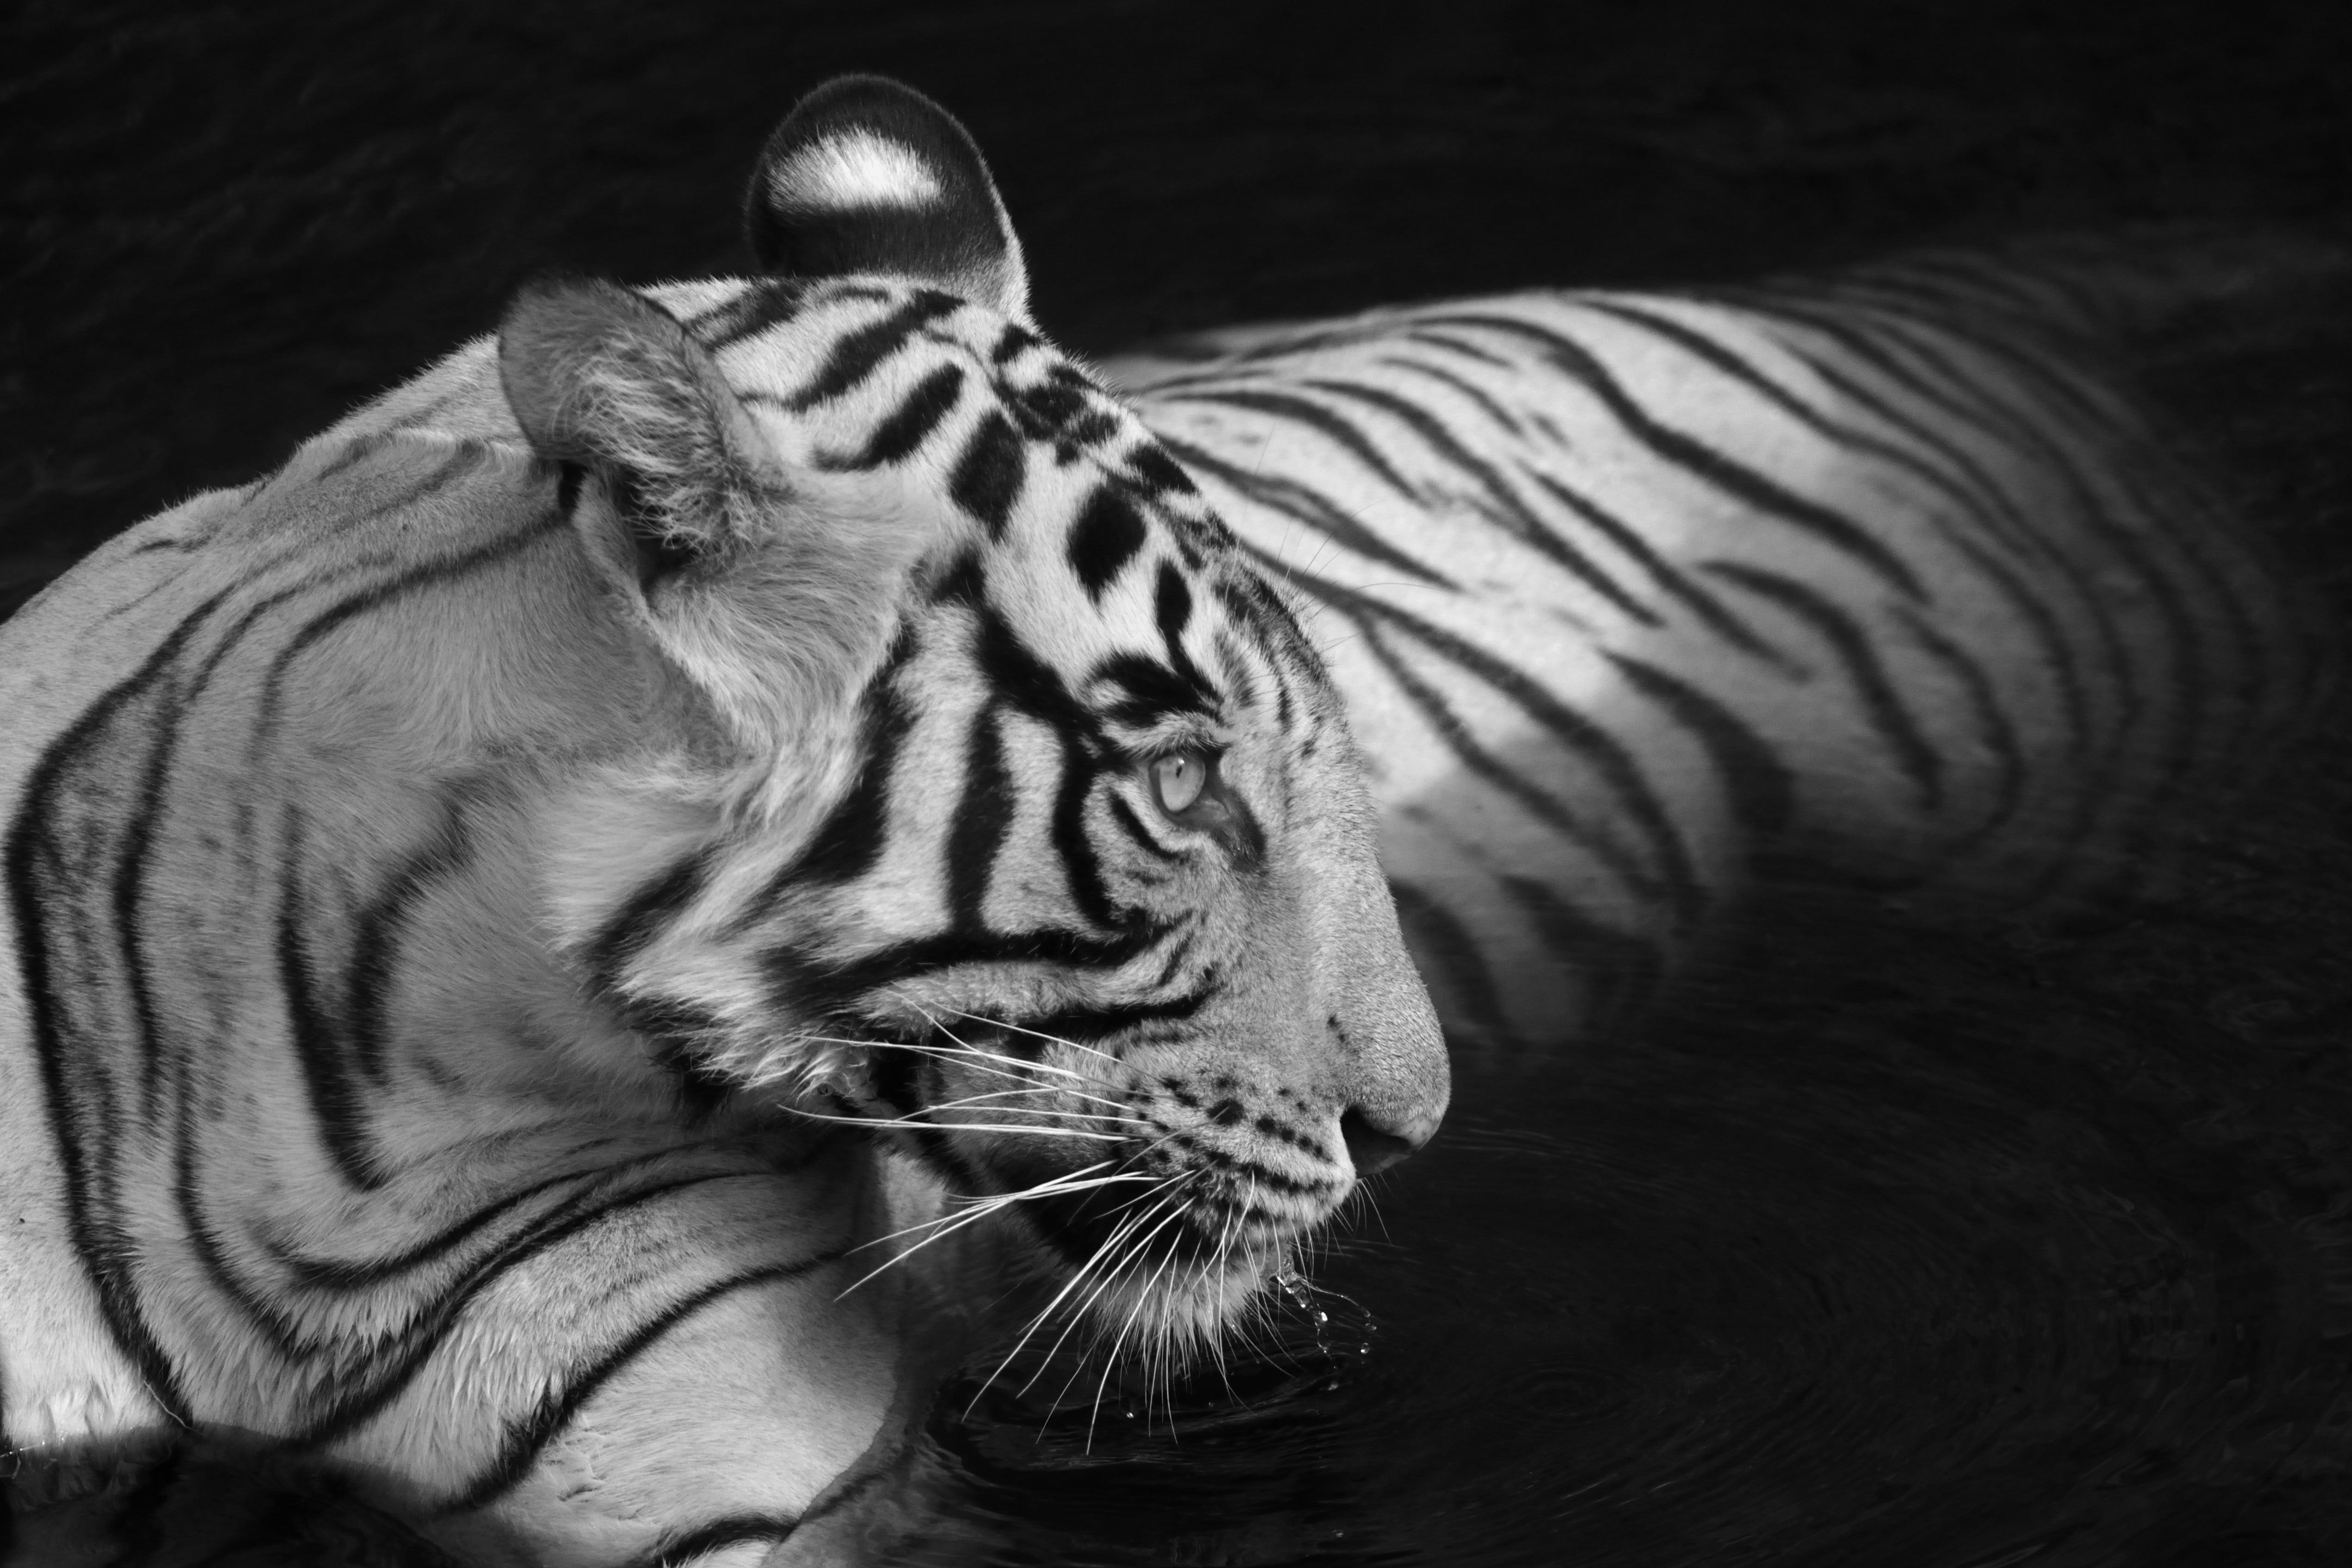 Aditya Dicky Singh Black and White Photograph - Landscape Nature Animal Photograph Large Black and White Tiger Water Lake India 